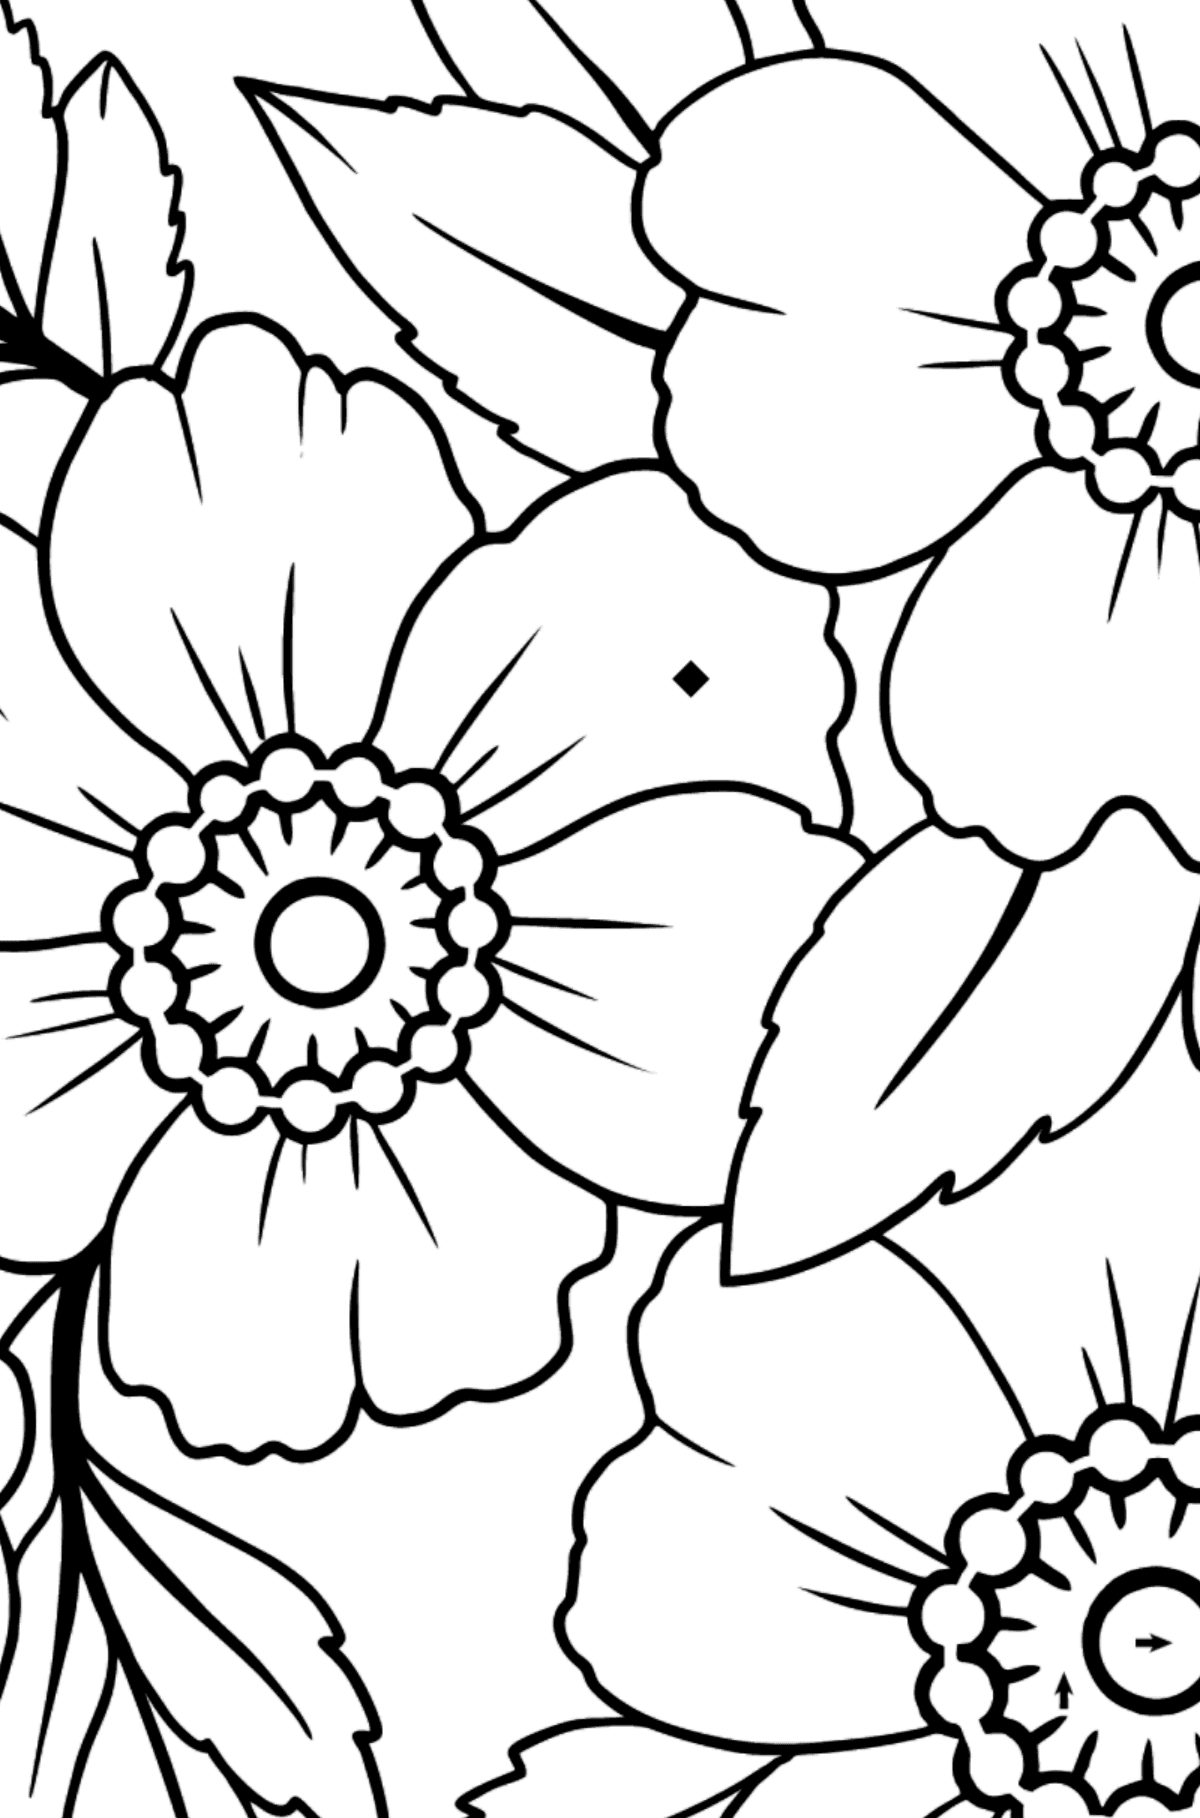 Flower Coloring Page - Japanese Velvet Anemone - Coloring by Symbols for Kids